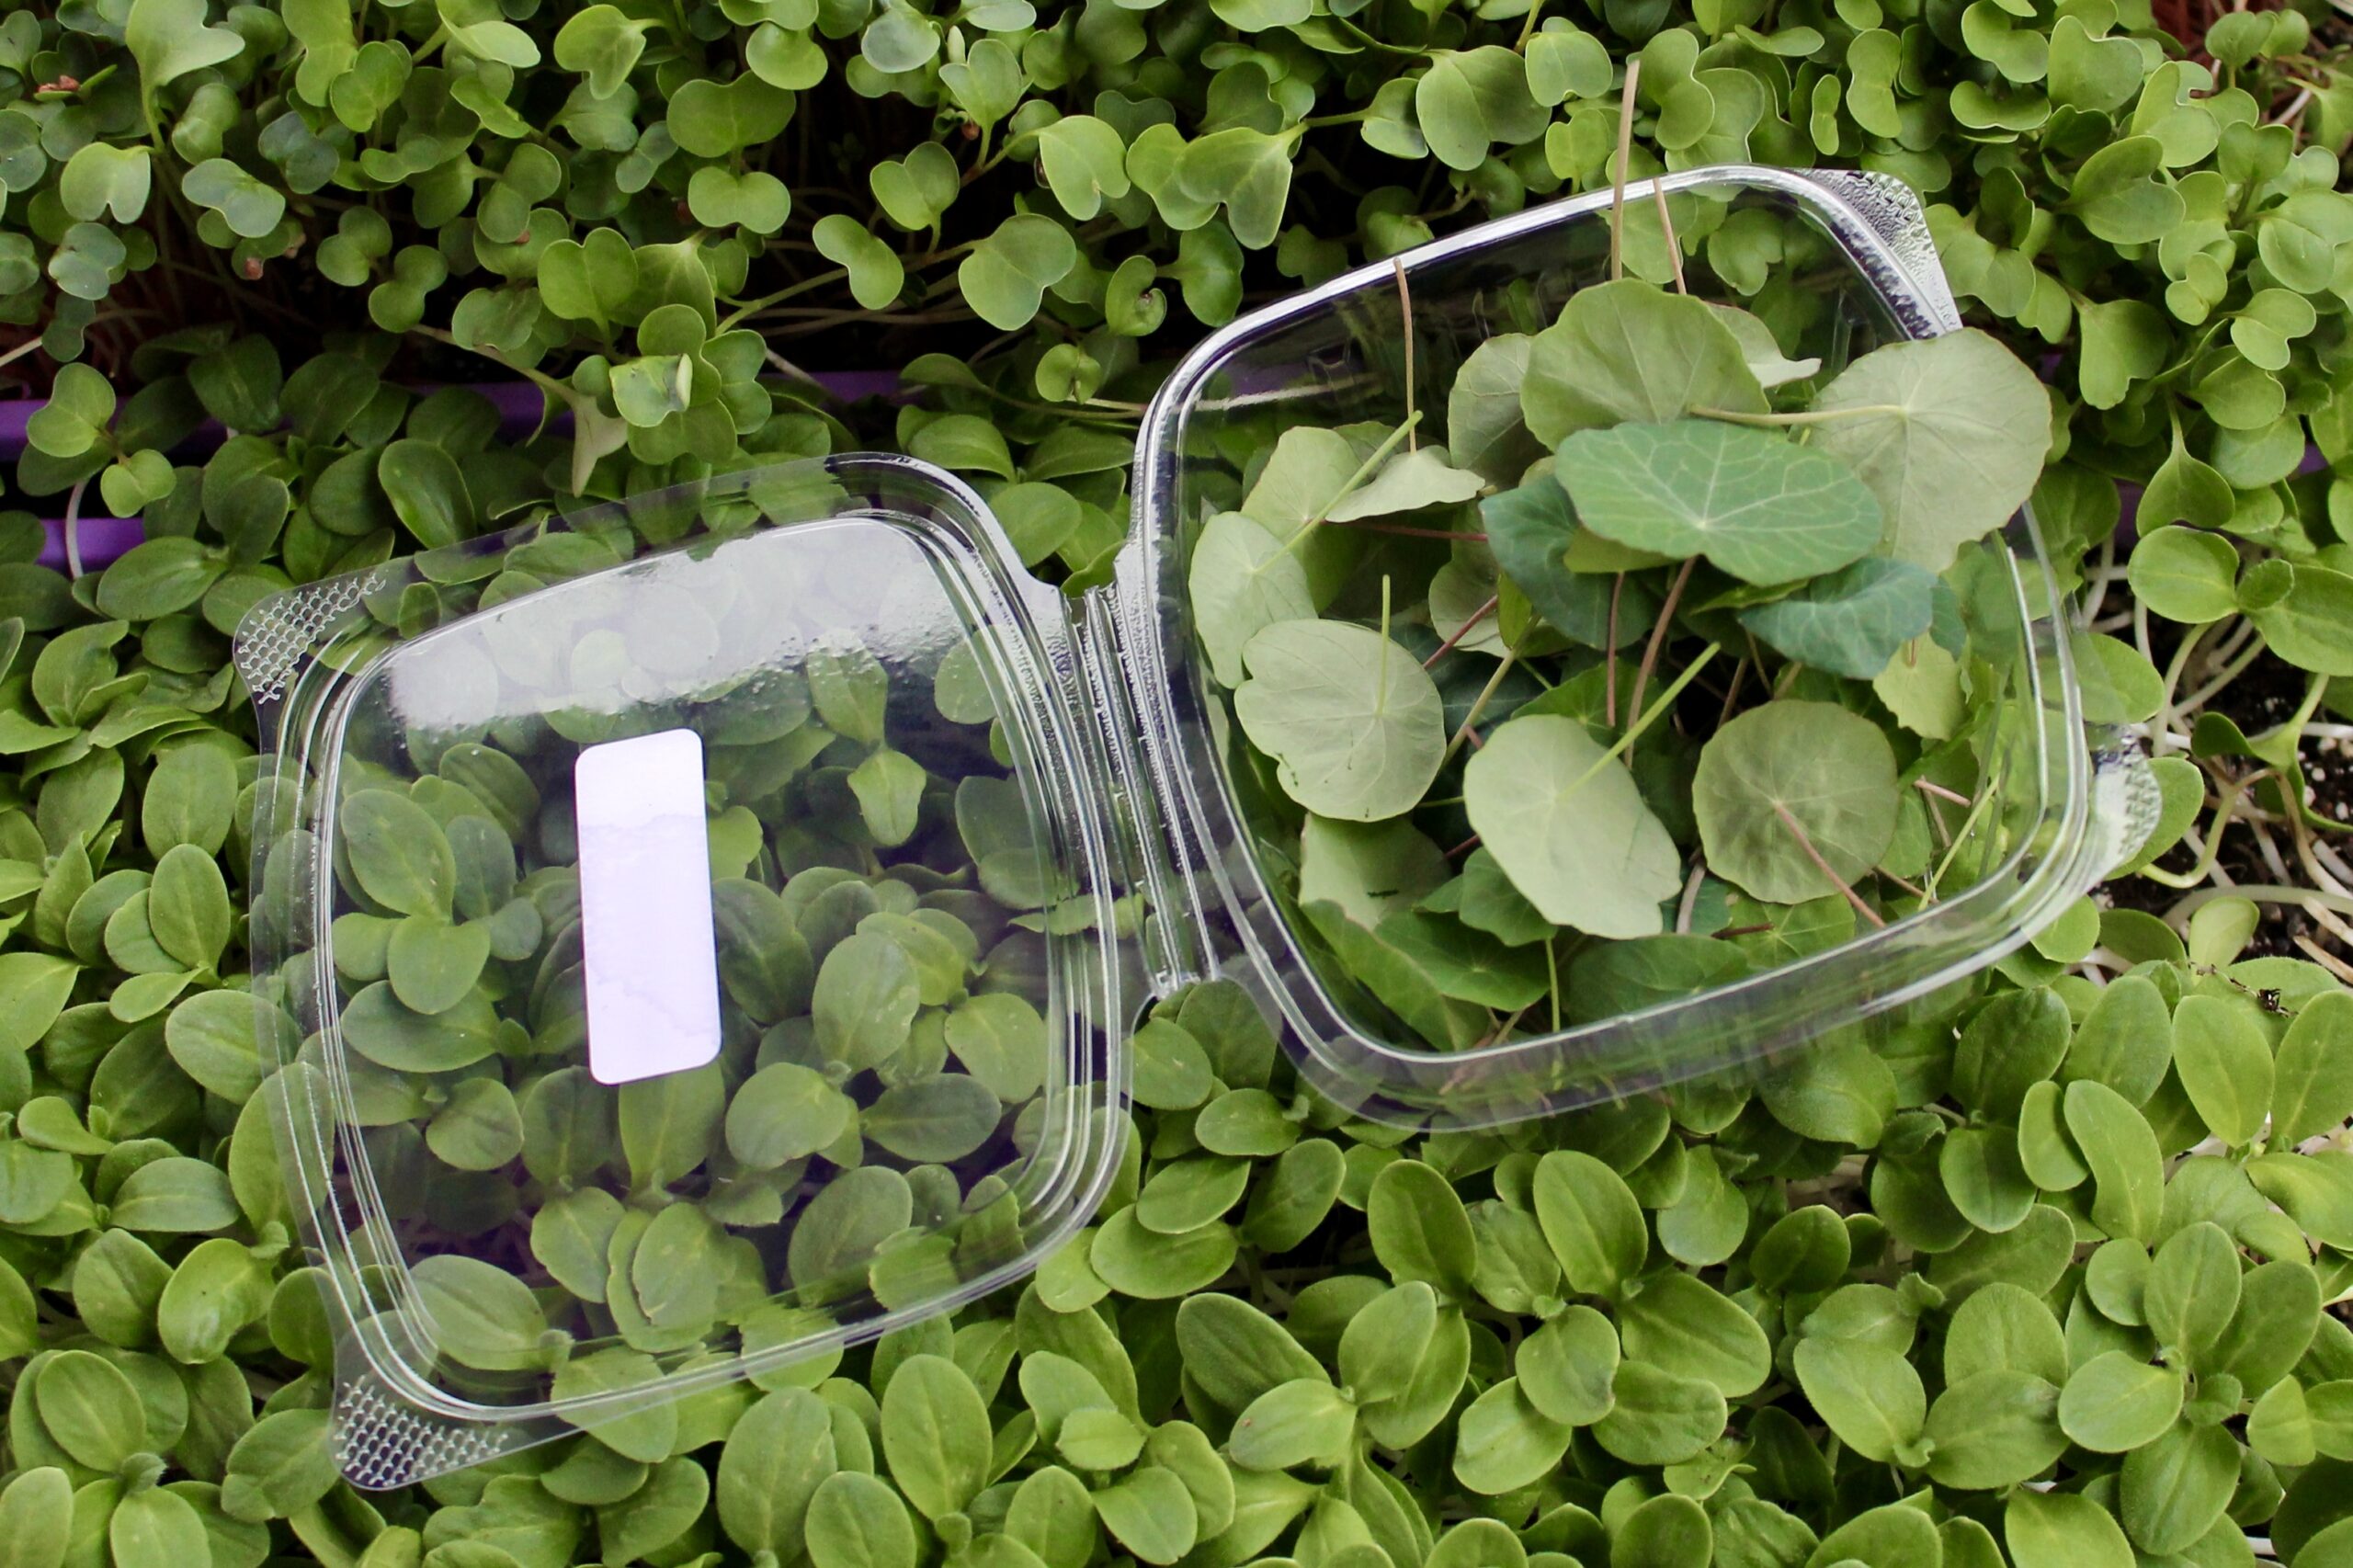 Microgreens and a micrgreens container